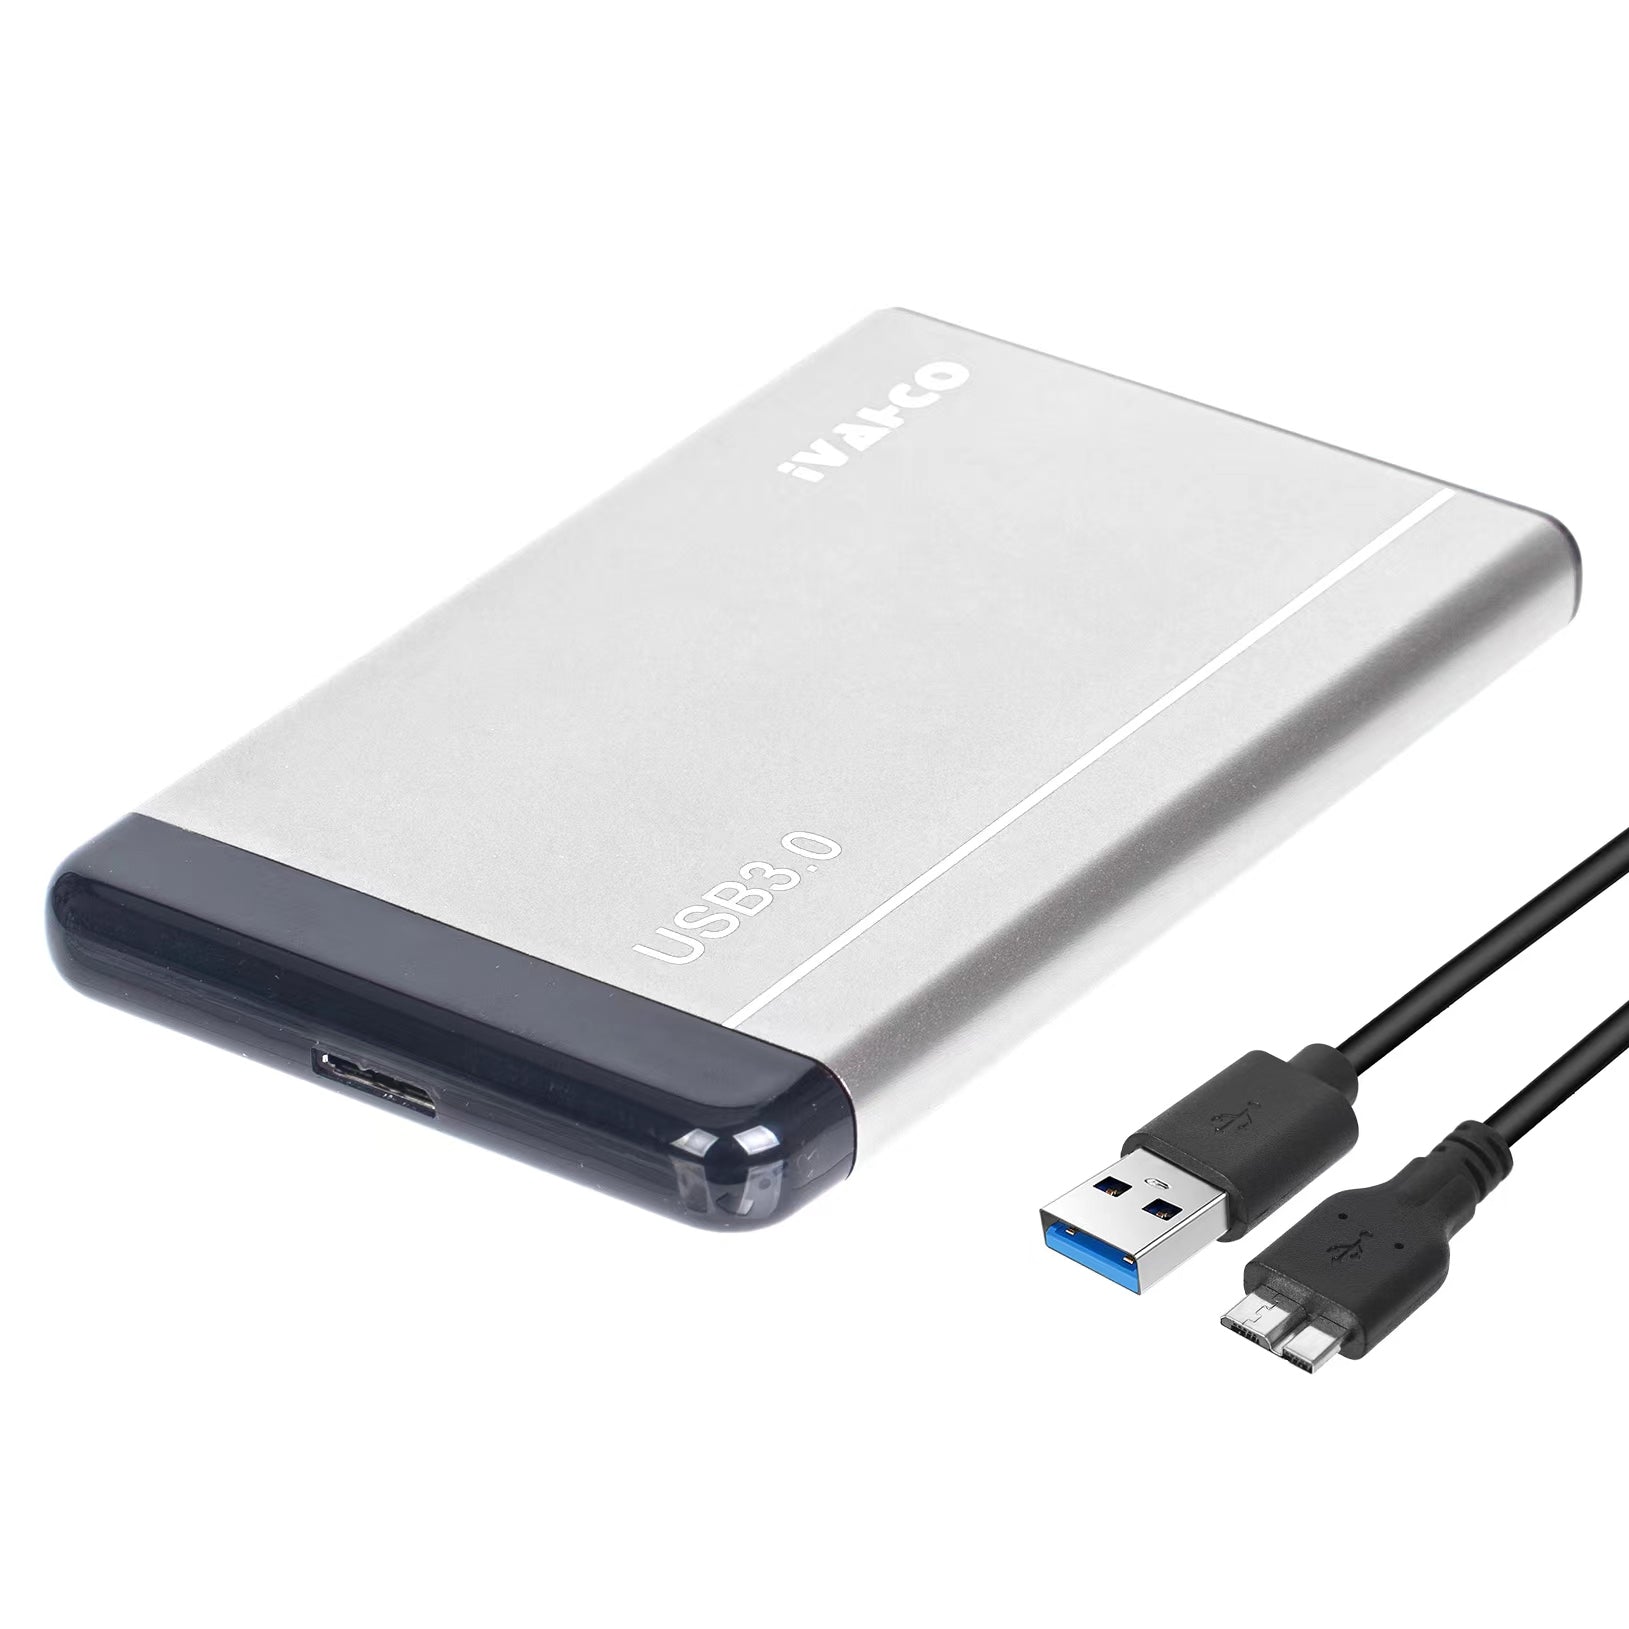 IVAHCO 320GB 2.5" HDD External Case Plug and Play USB3.0 Matte Hard Disk Enclosure with Data Cable - Silver